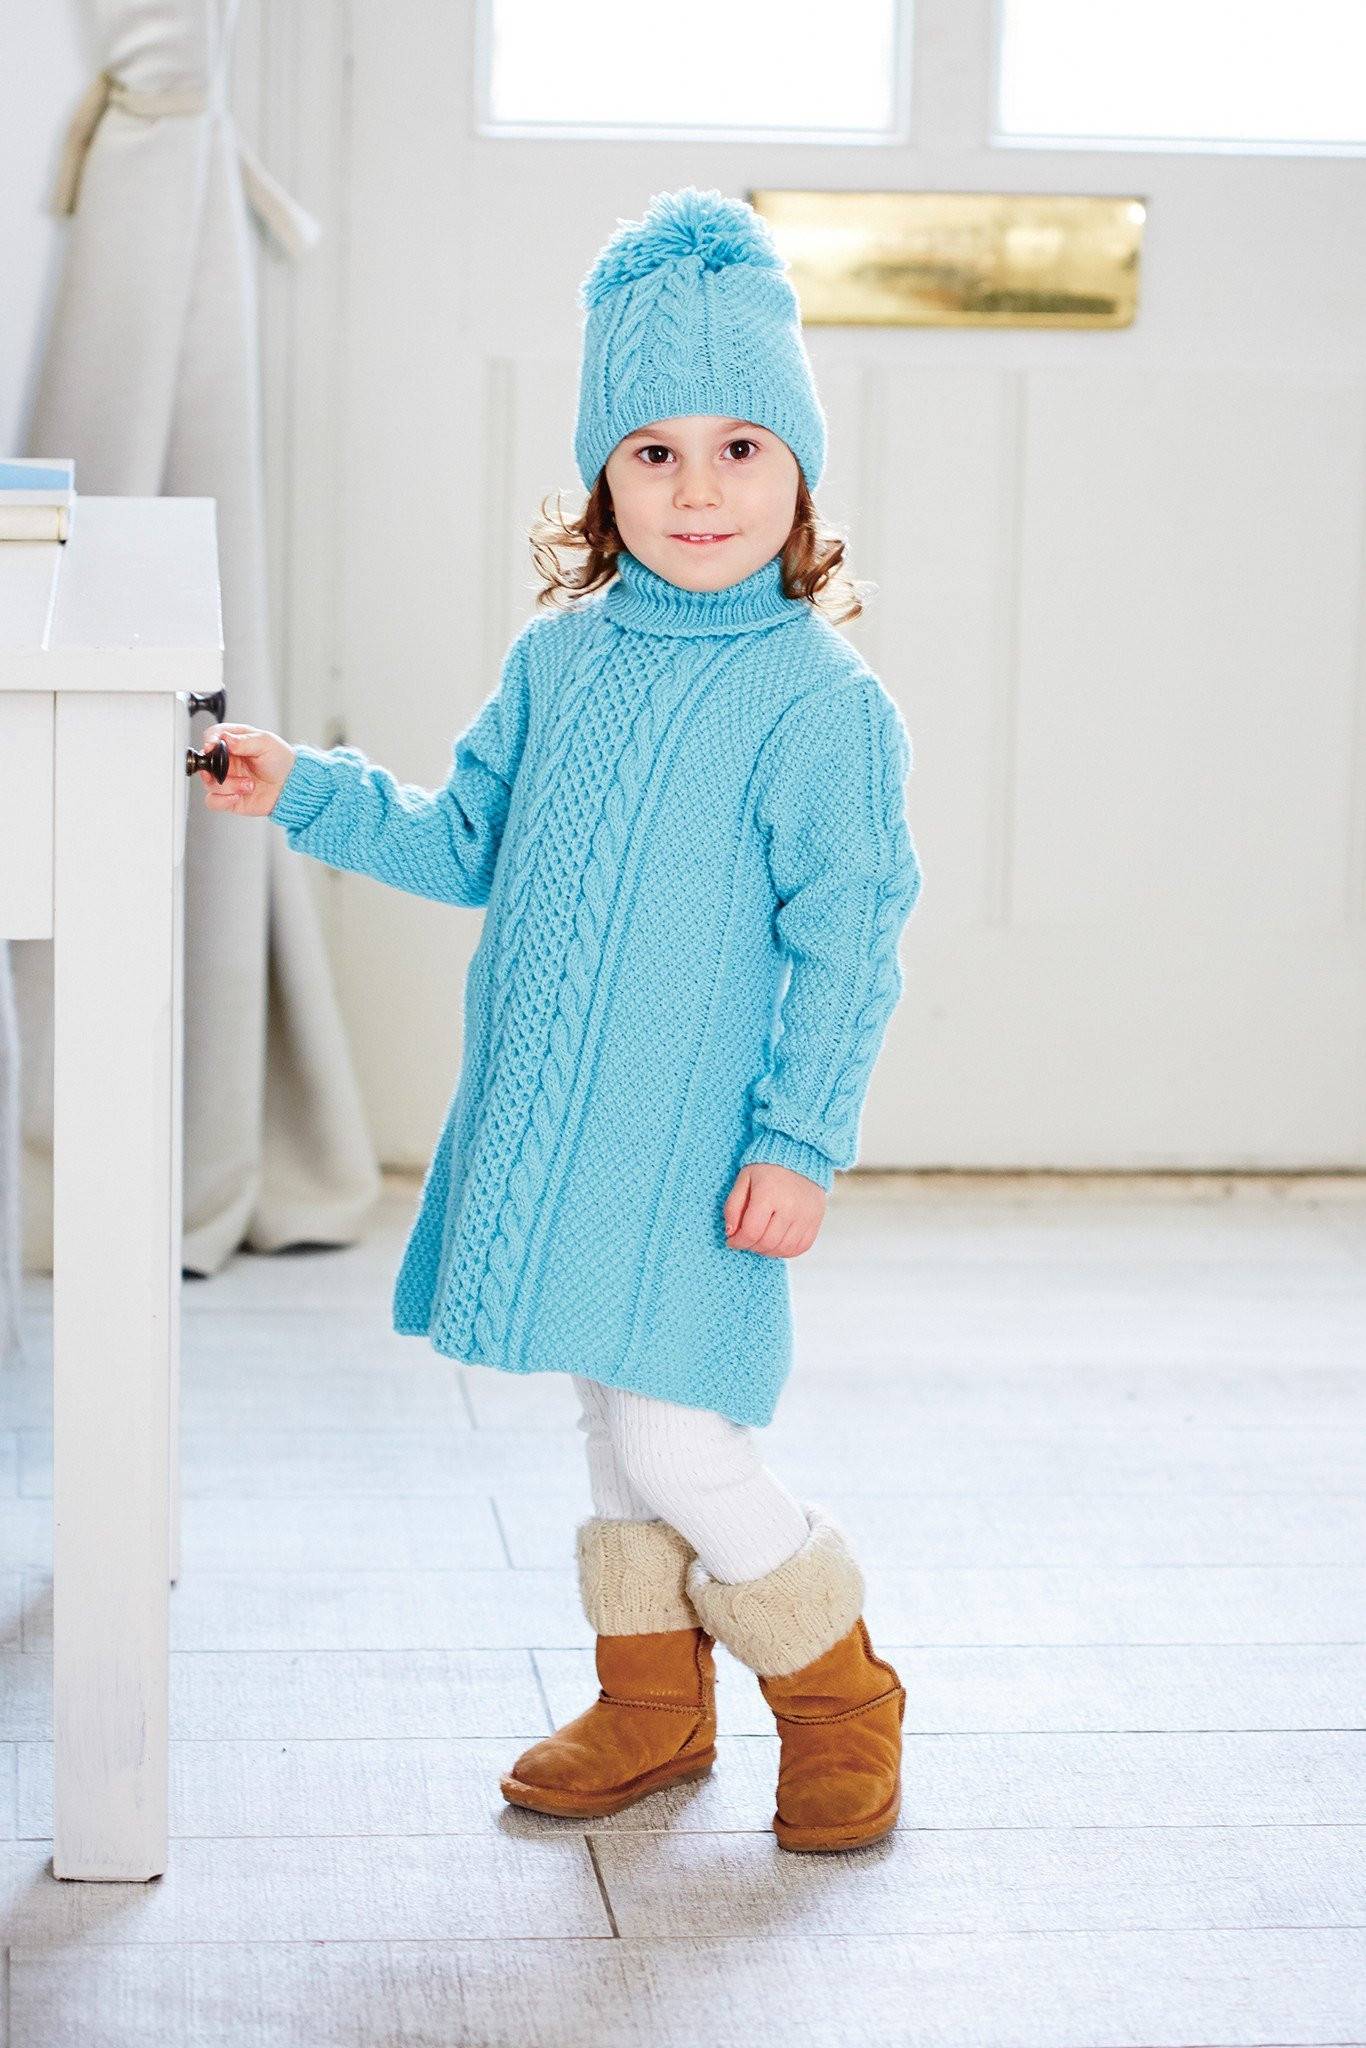 Vintage Girls Roll Neck Dress And Hat Knitting Patterns | The Knitting ...